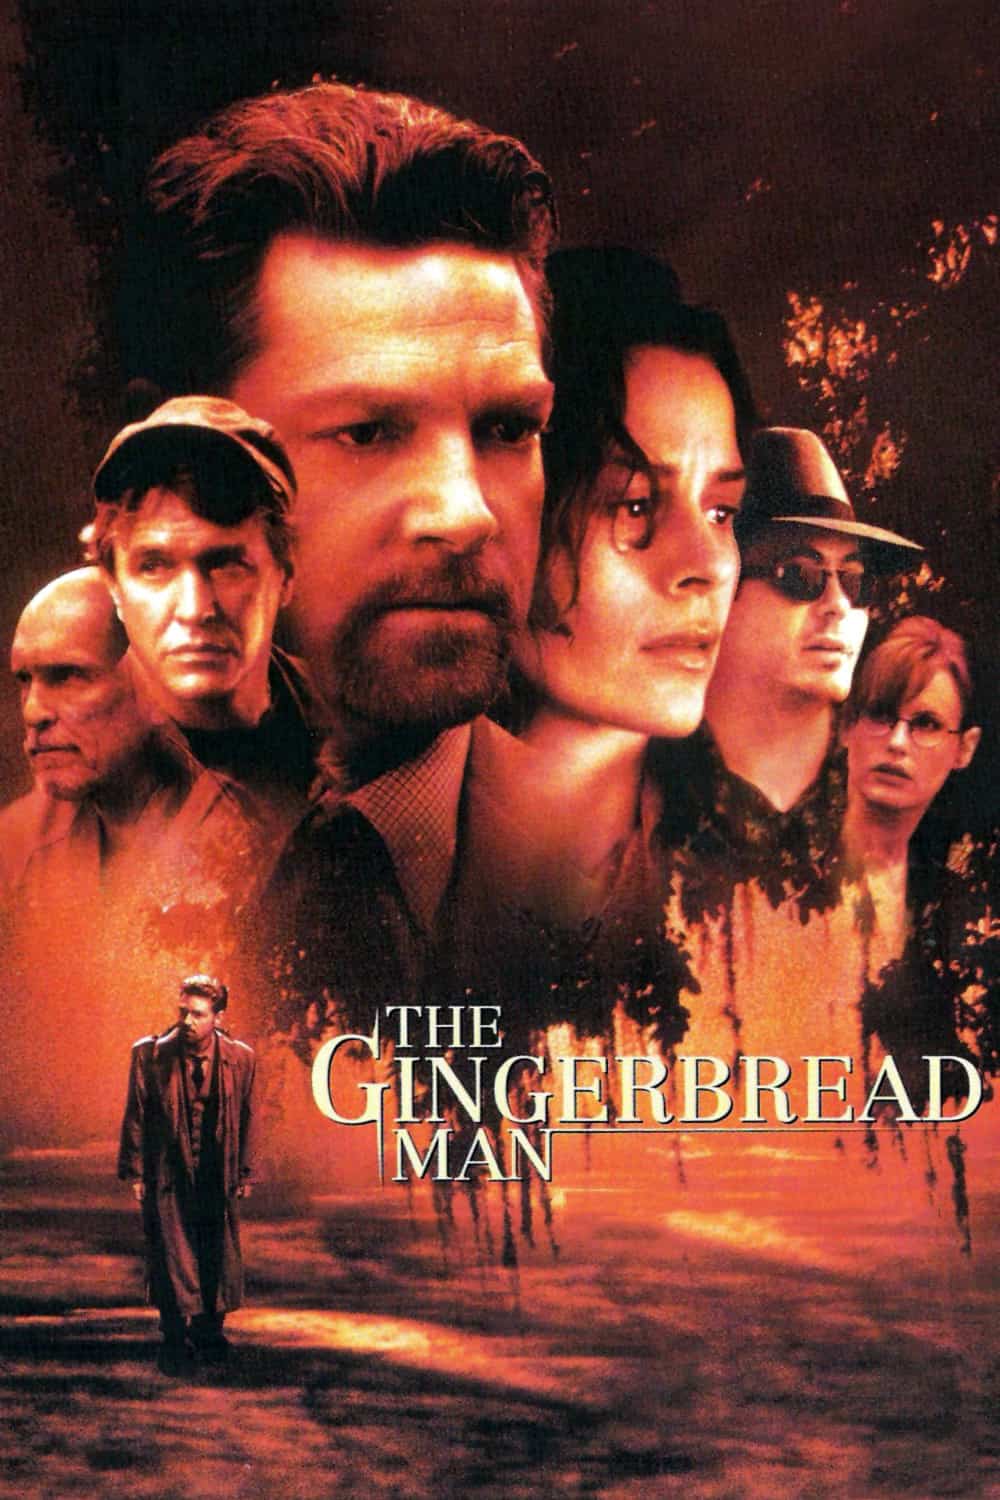 The Gingerbread Man, 1998 